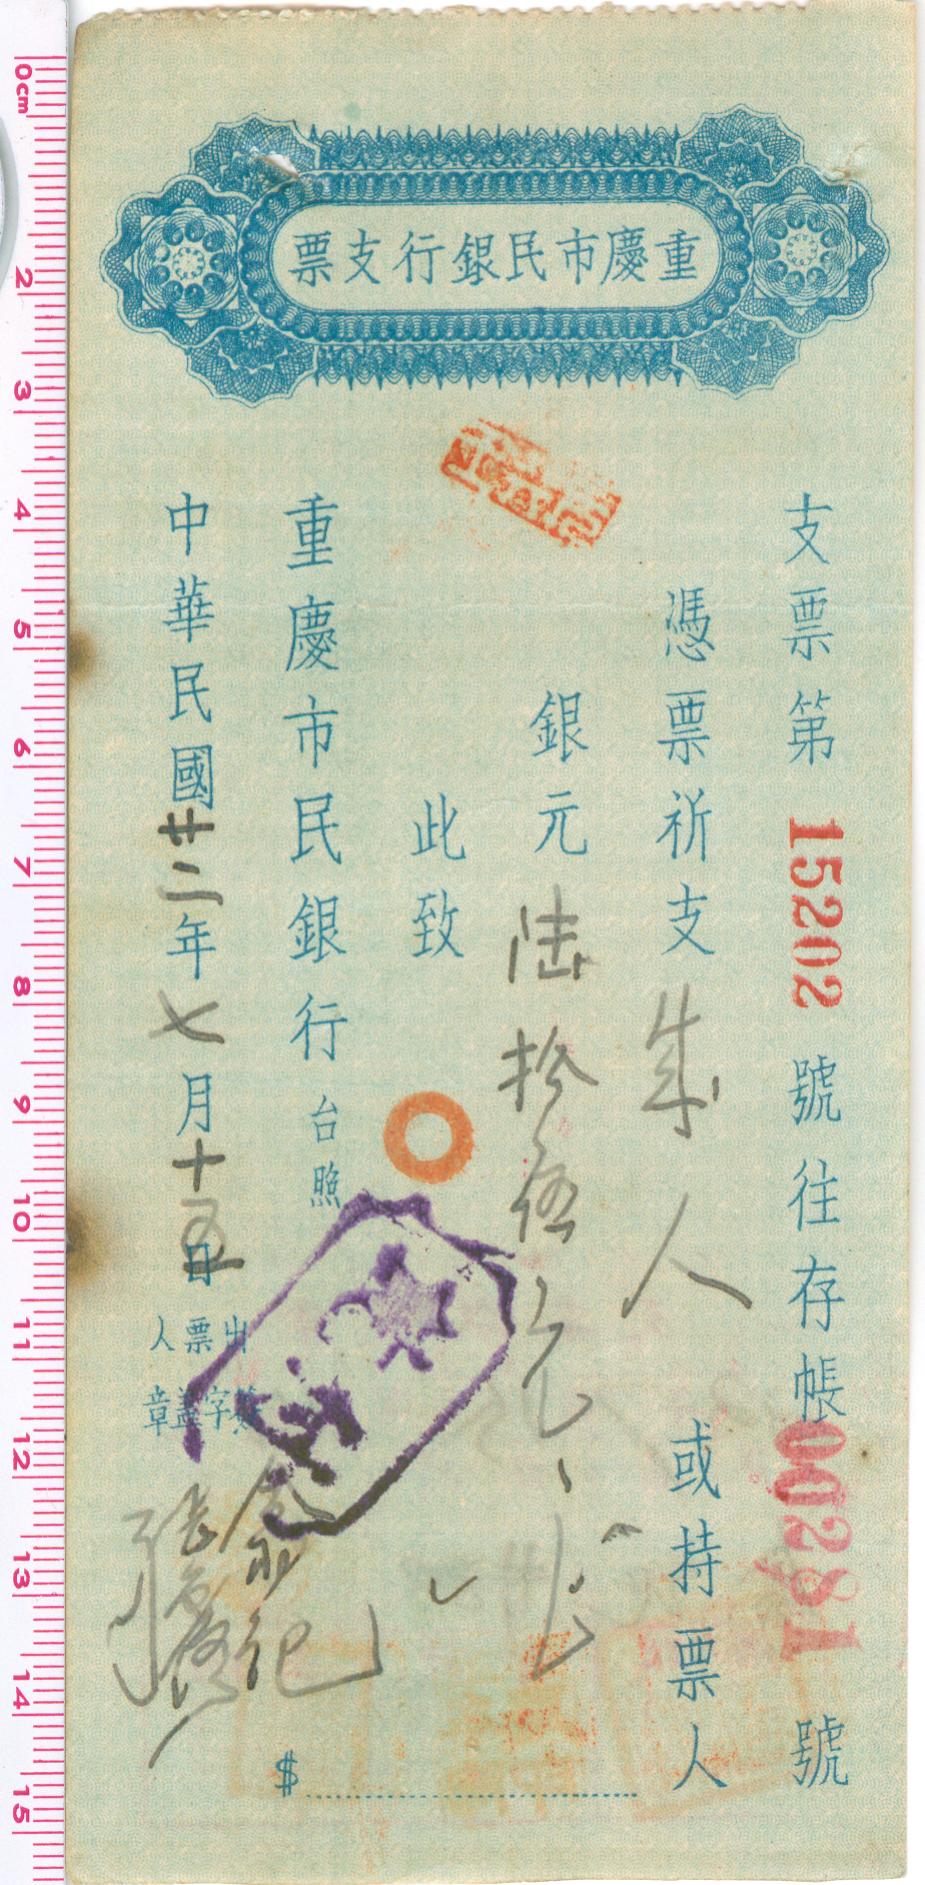 D2225, Check of the Chungking Citizen Bank, 1933 China